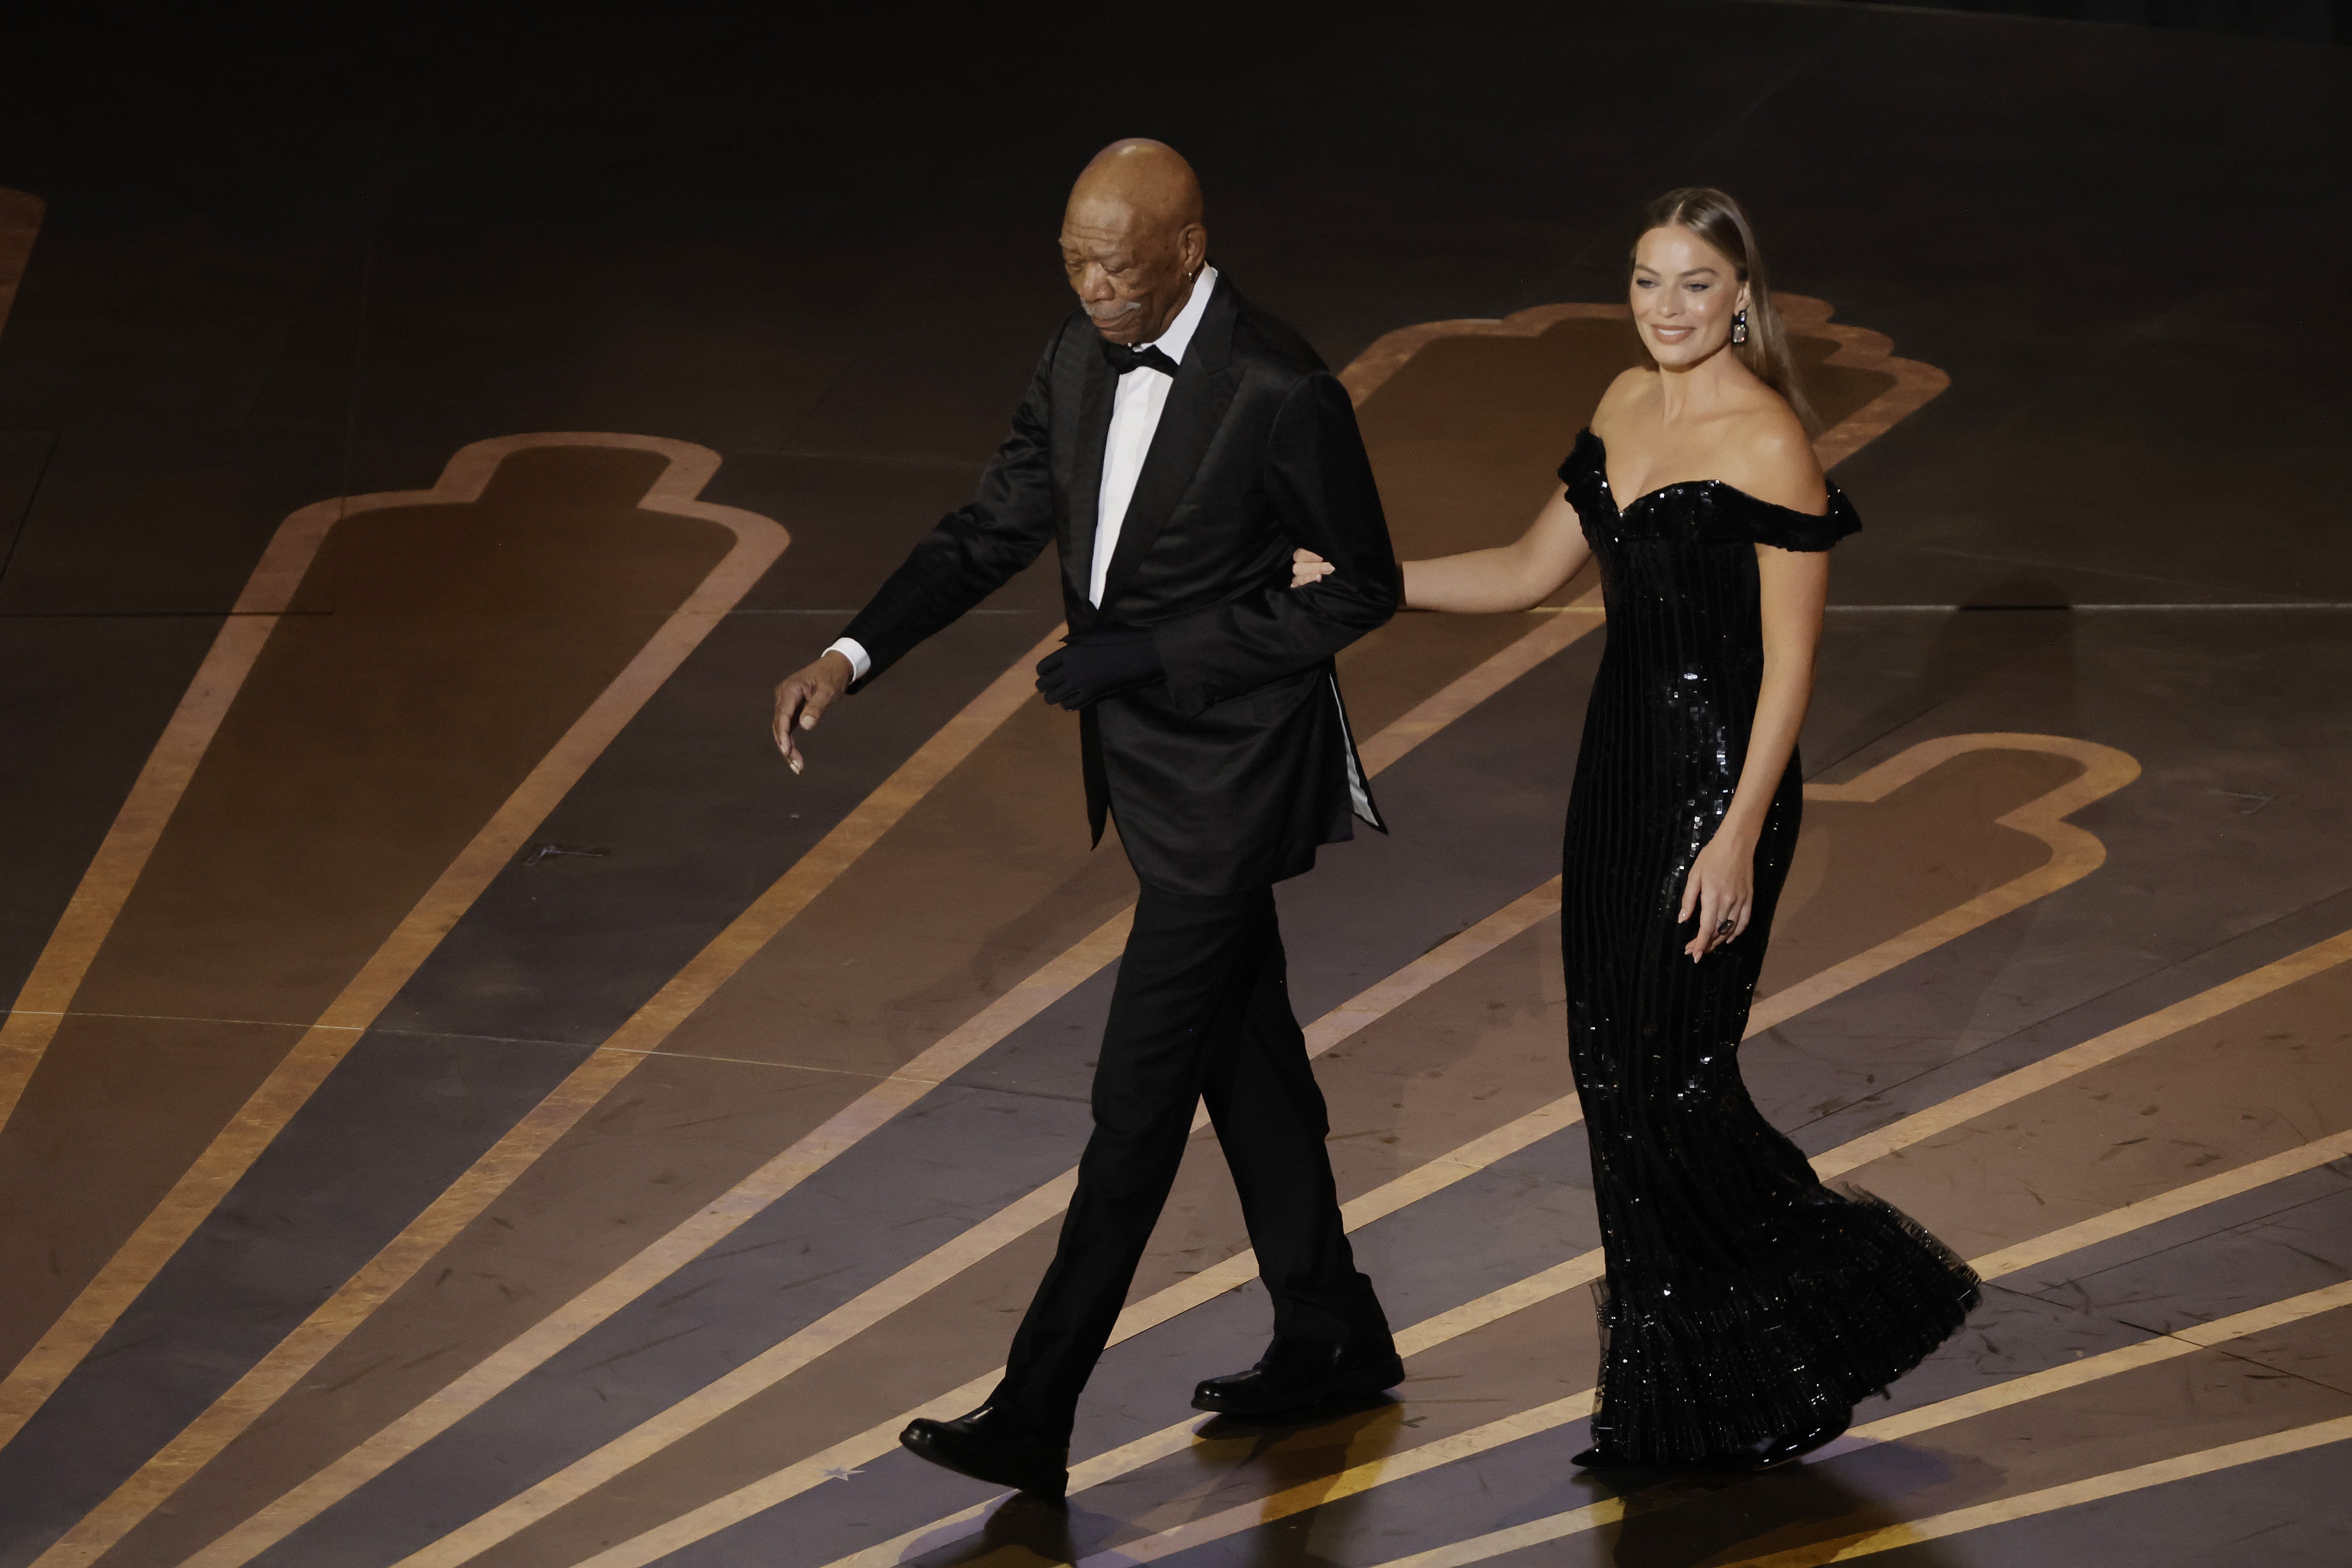 Morgan Freeman and Margot Robbie at the 95th Annual Academy Awards in California in 2023 | Source: Getty Images